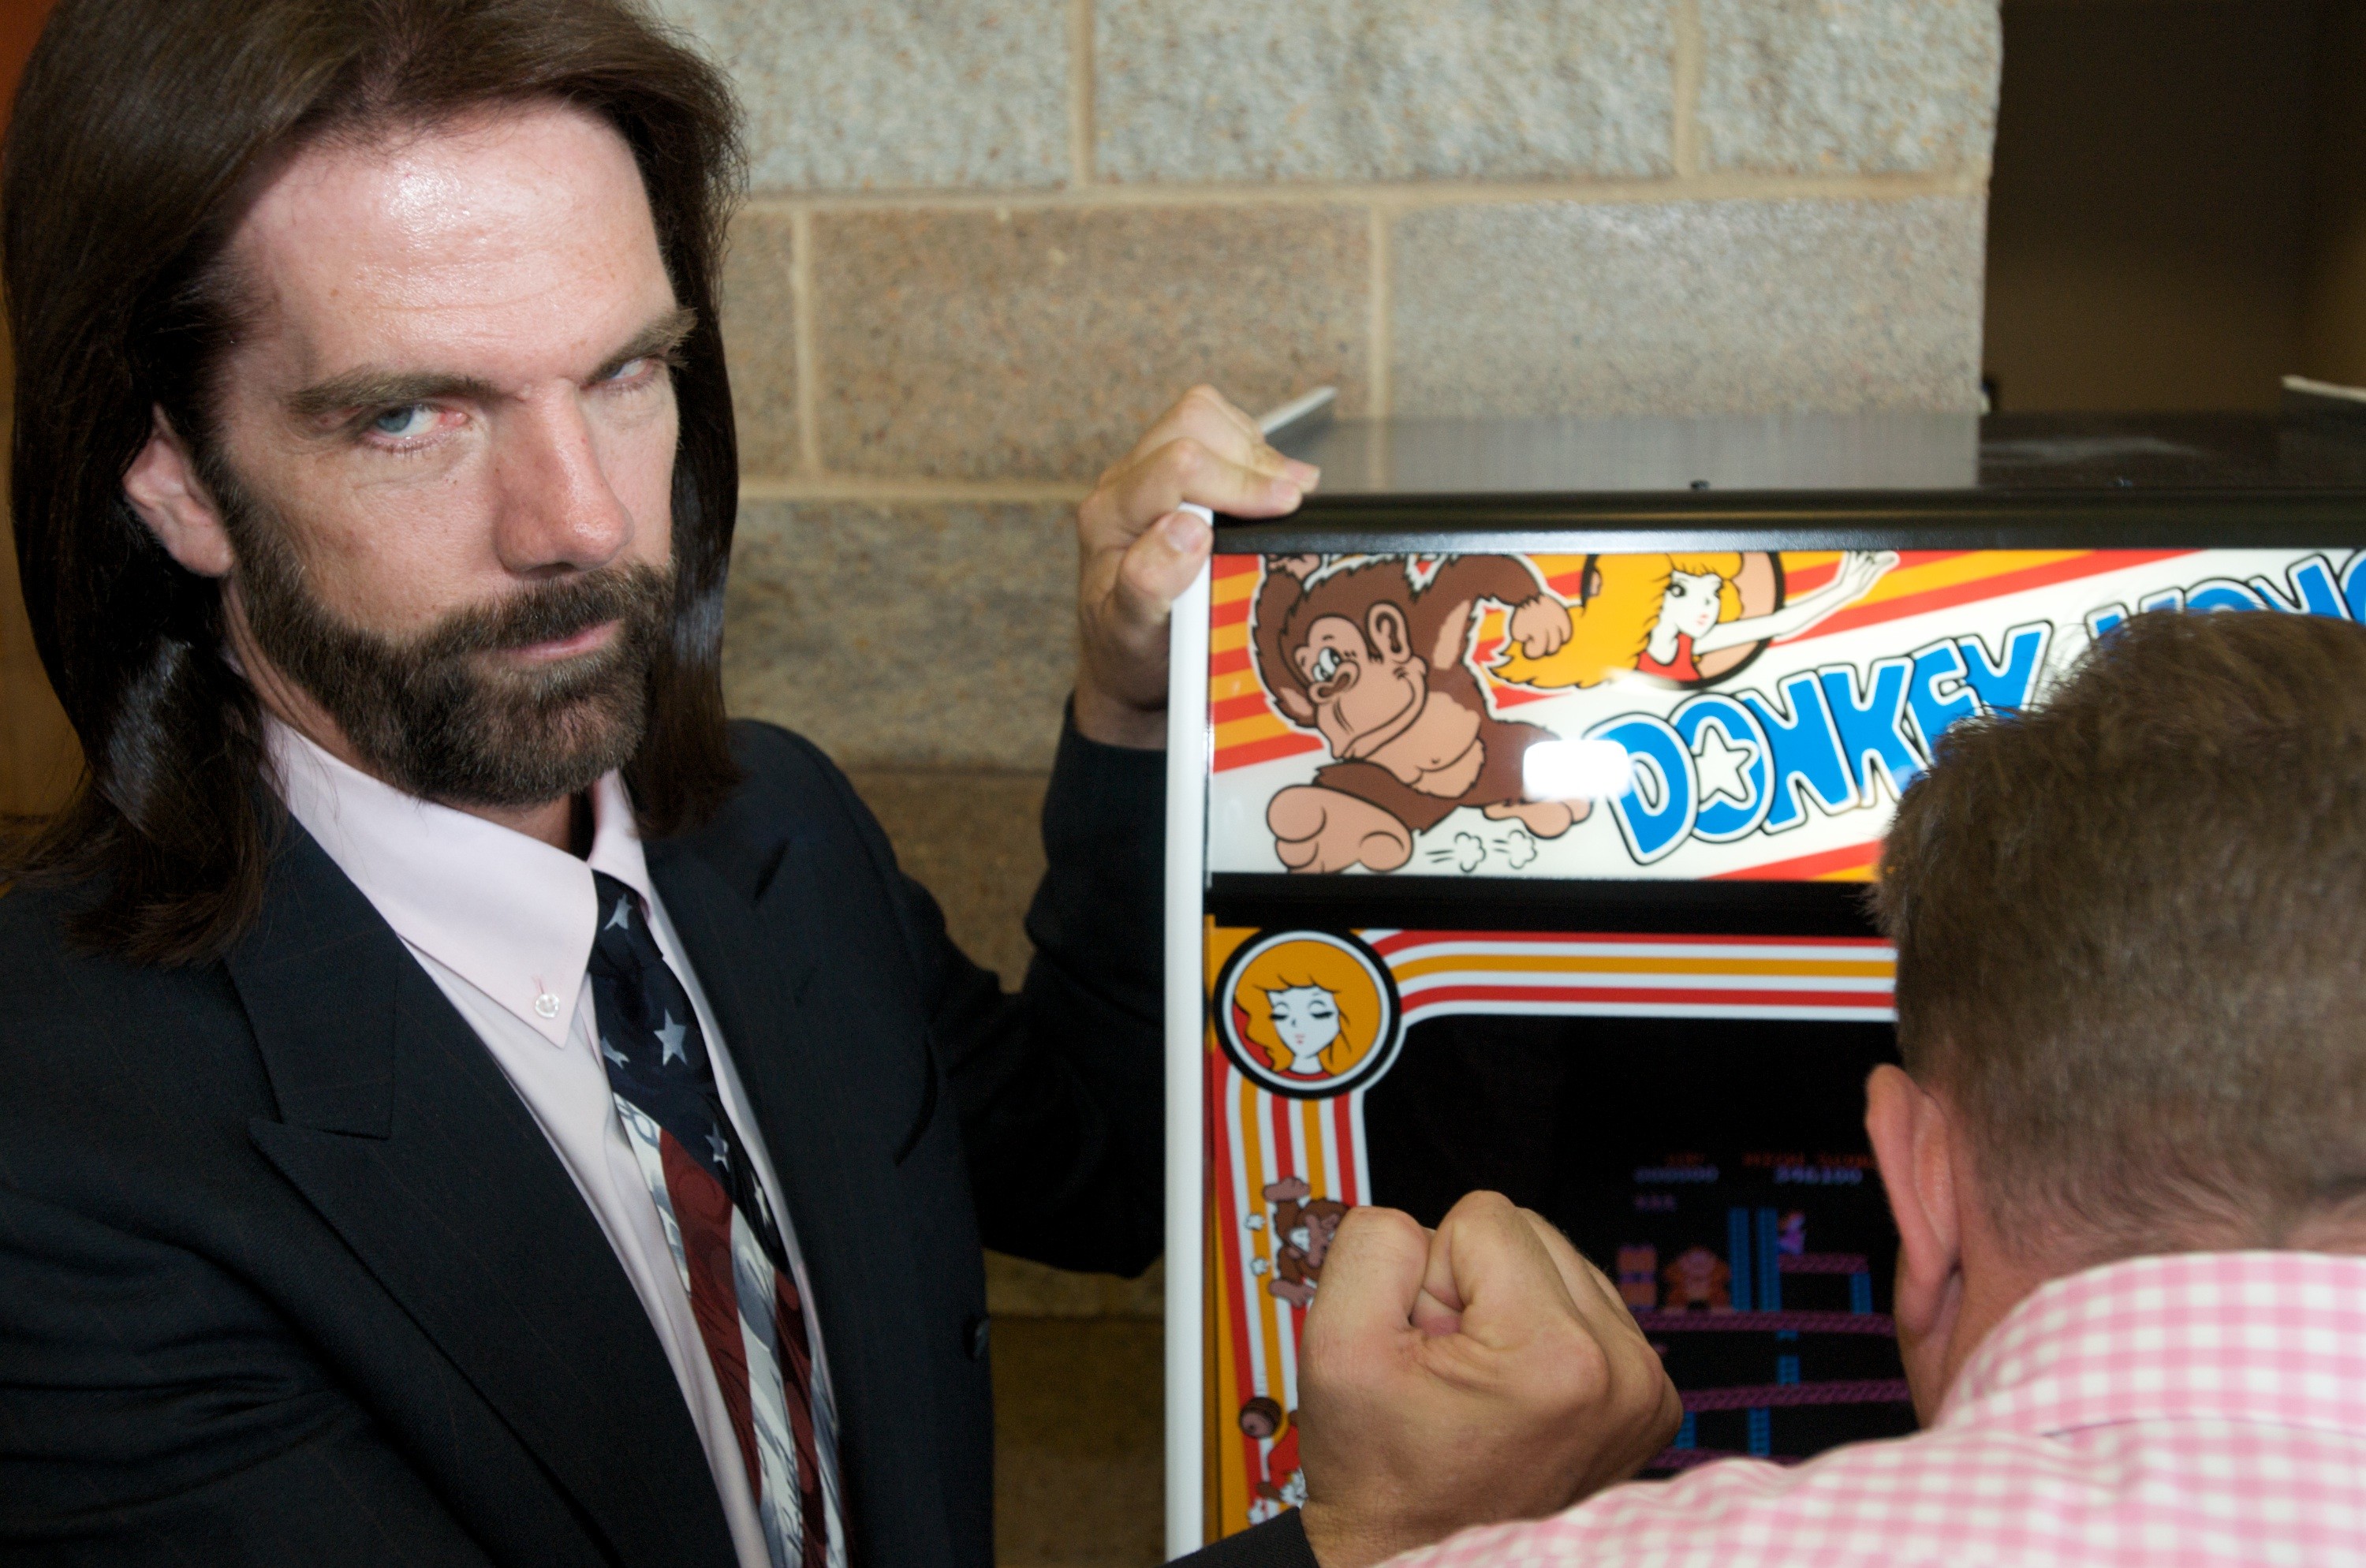 King” of 'Donkey Kong' Billy Mitchell accused of cheating by forensic  analyst